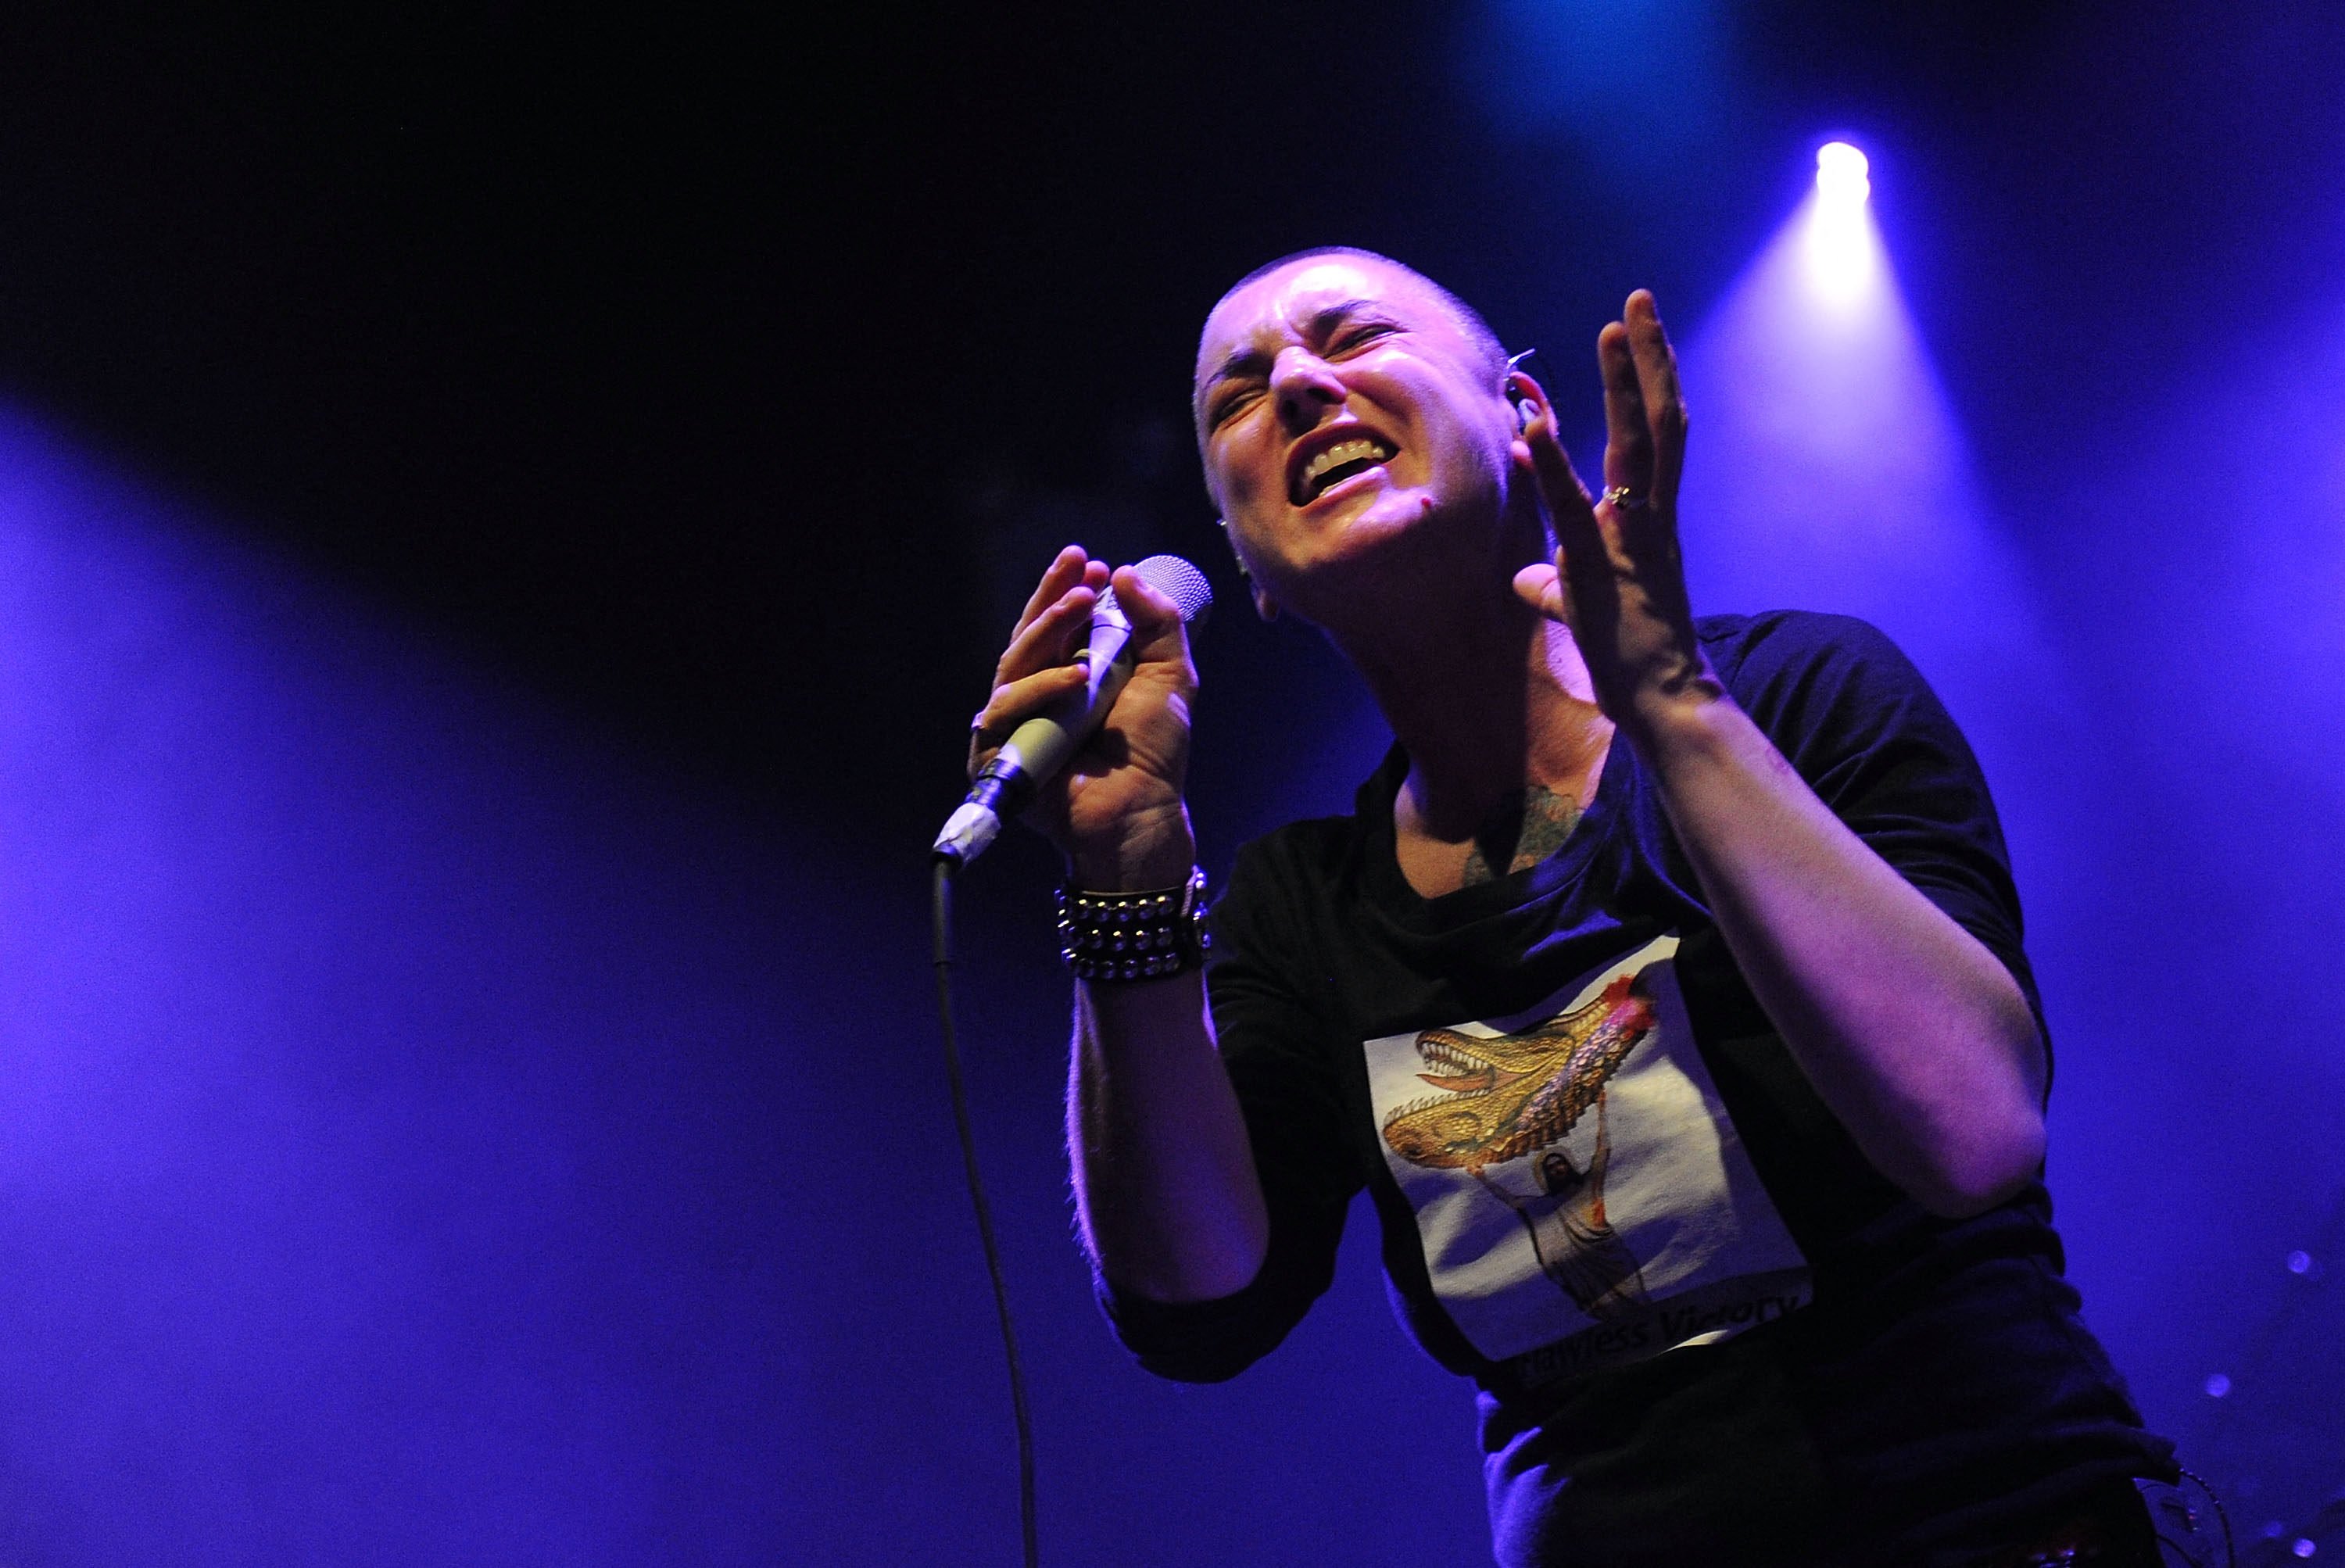 Irish singer Sinead O’Connor performs at the Highline Ballroom in New York in February 2012. Photo: AFP